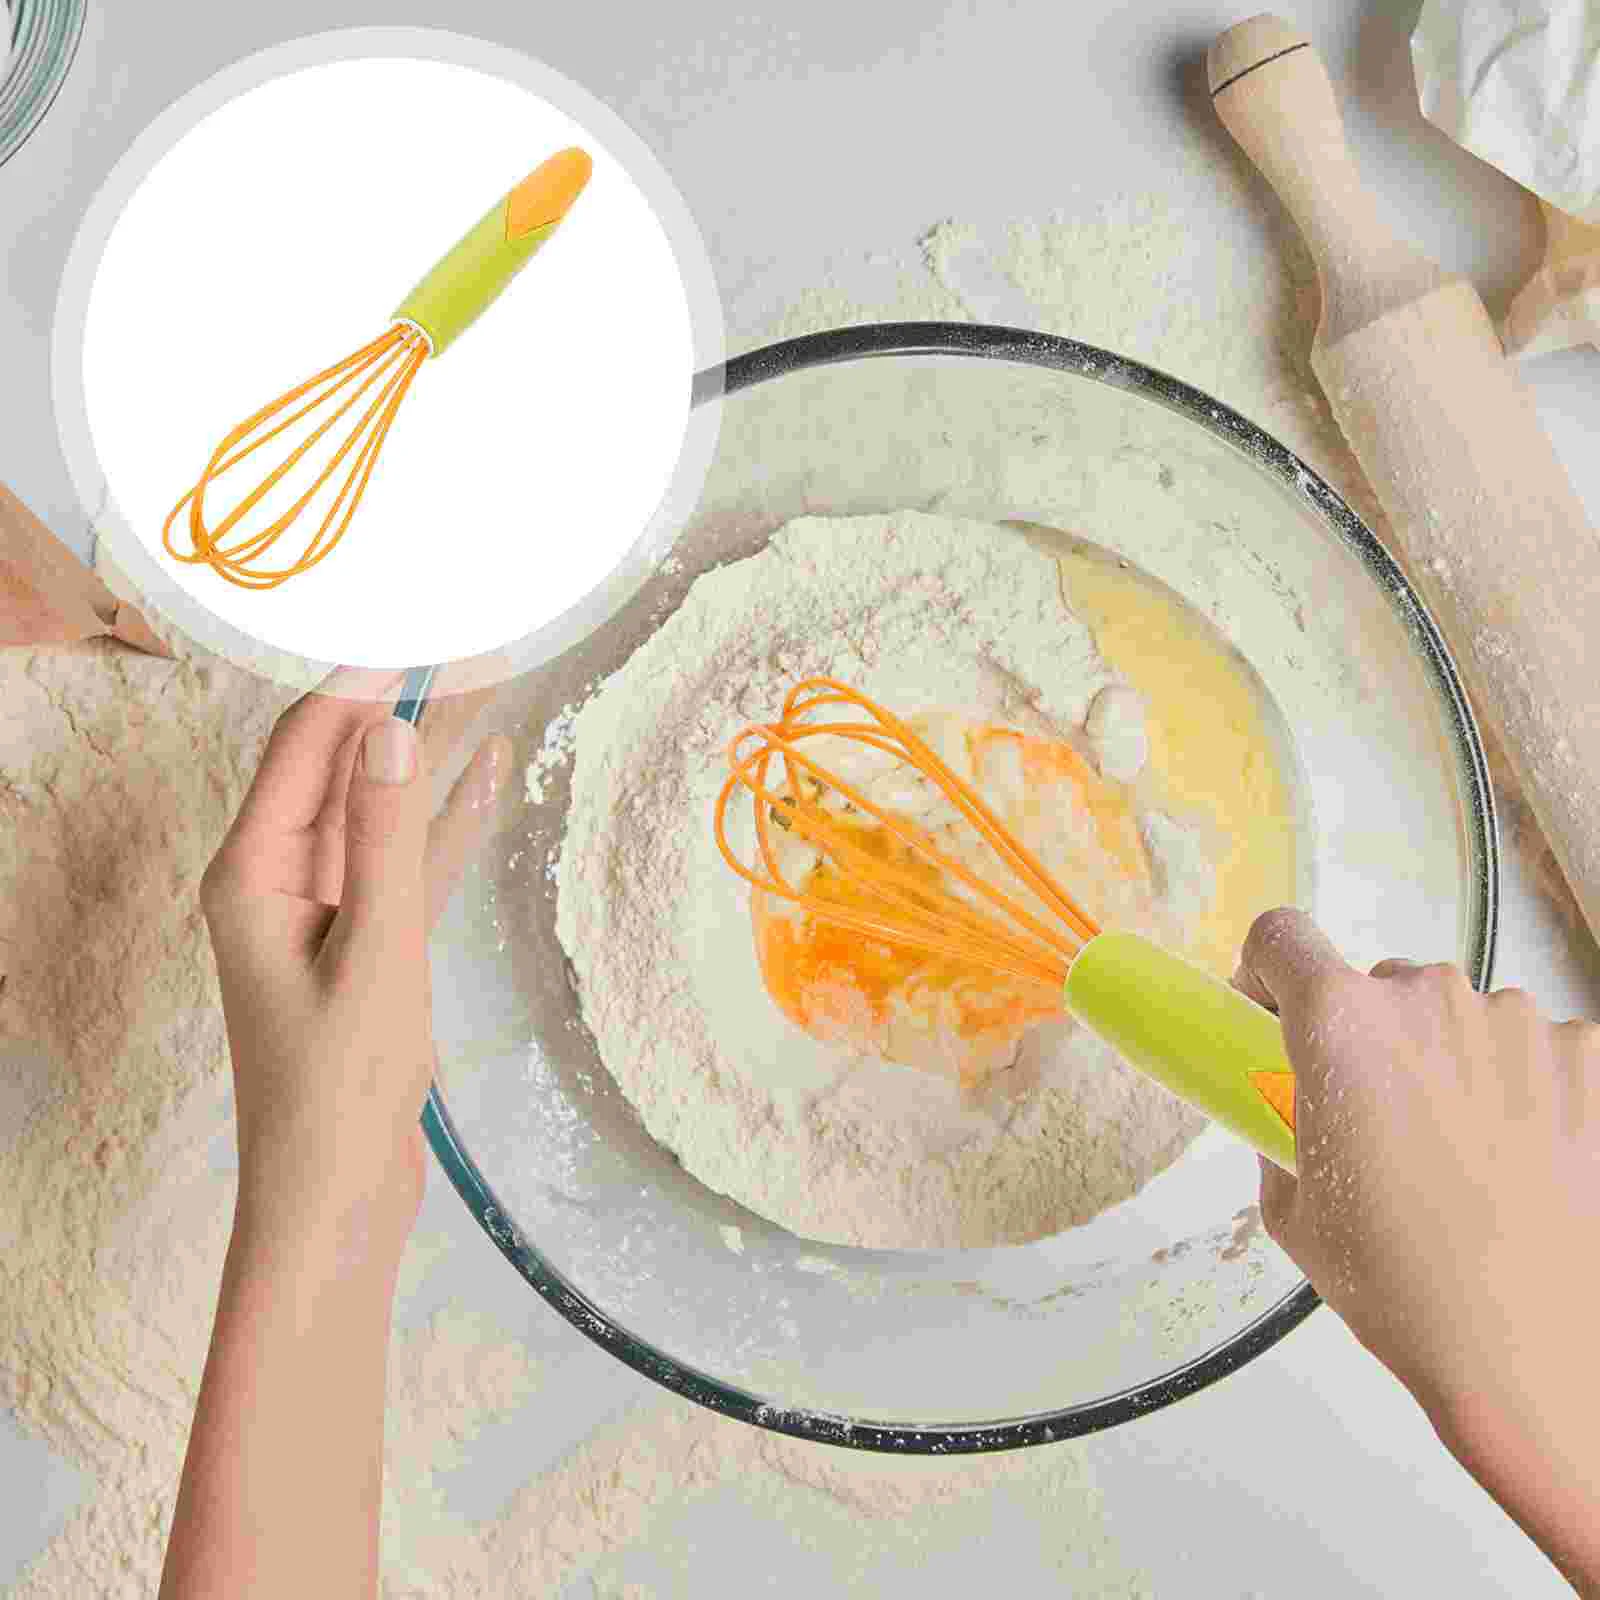 

Whisk Egg Beater Hand Kitchen Balloon Silicone Manual Wire Mixer Cooking Cream Frother Whisks Whisking Blending Tool Baking